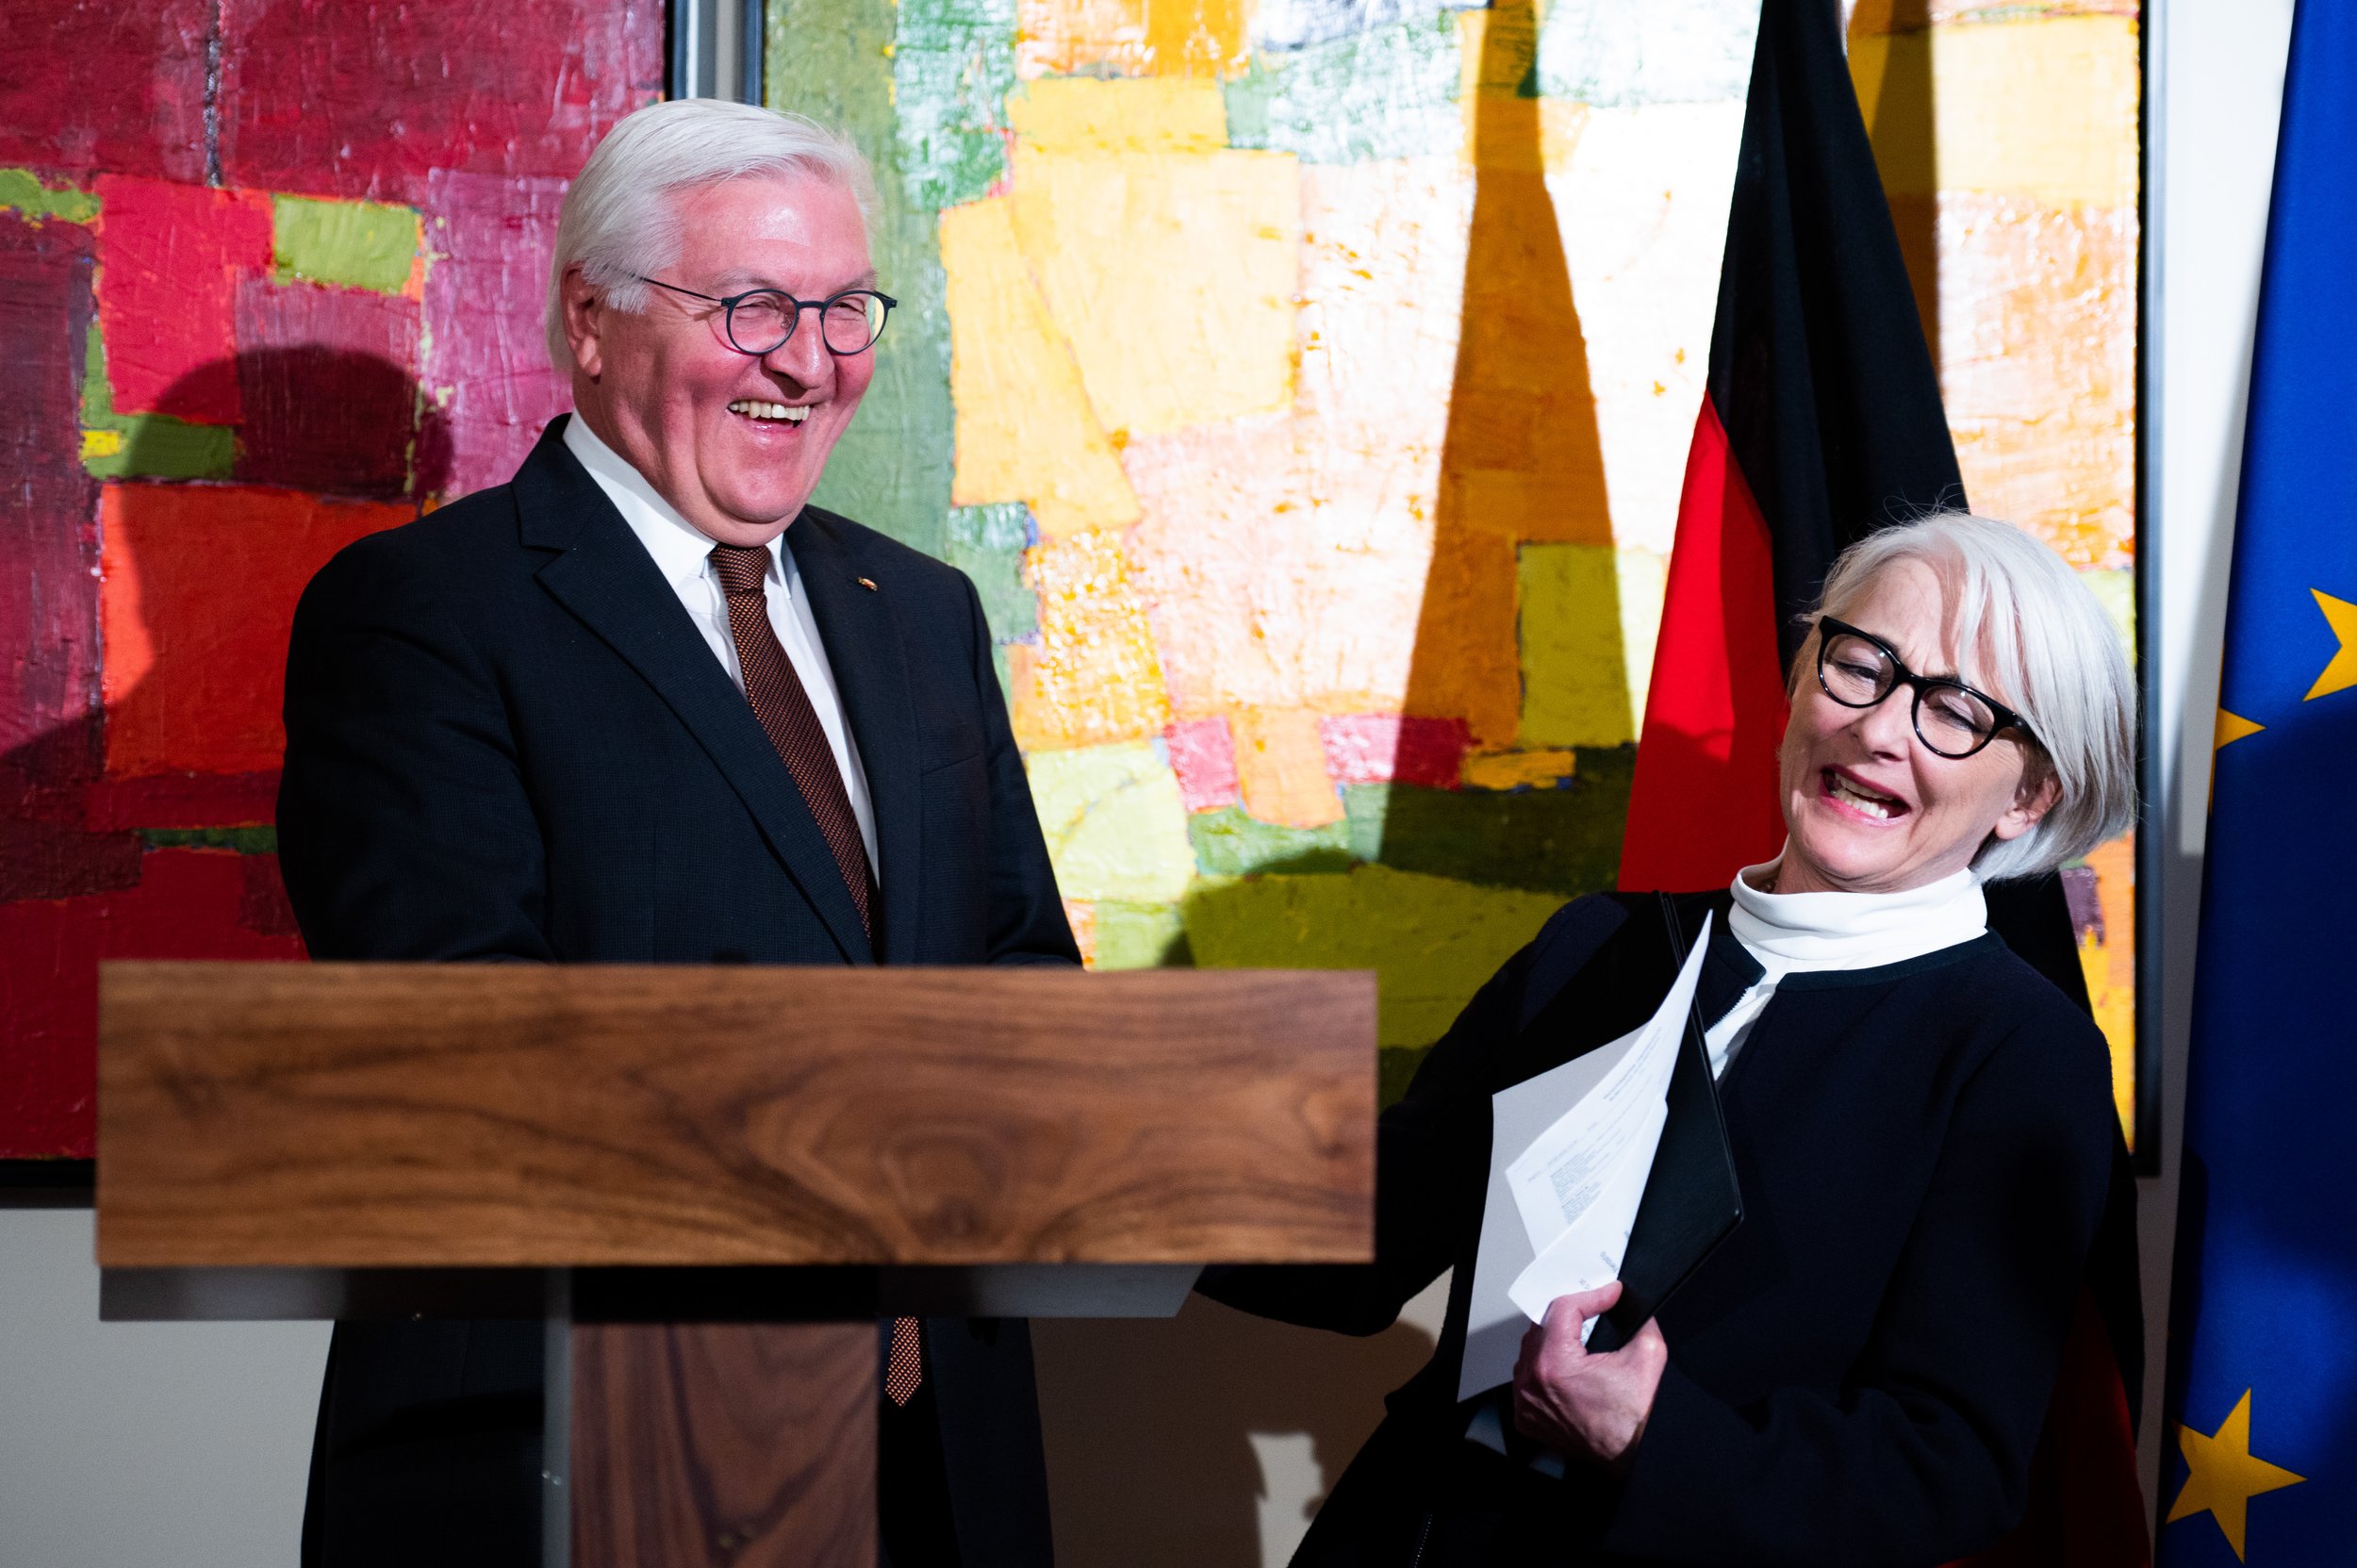  Ambassador of Germany to Canada, Sabine Sparwasser, right, shares a laugh with German President Frank-Walter Steinmeier at the official residence of the German Ambassador to Canada during an official visit in Ottawa, on Monday, April 24, 2023. THE C